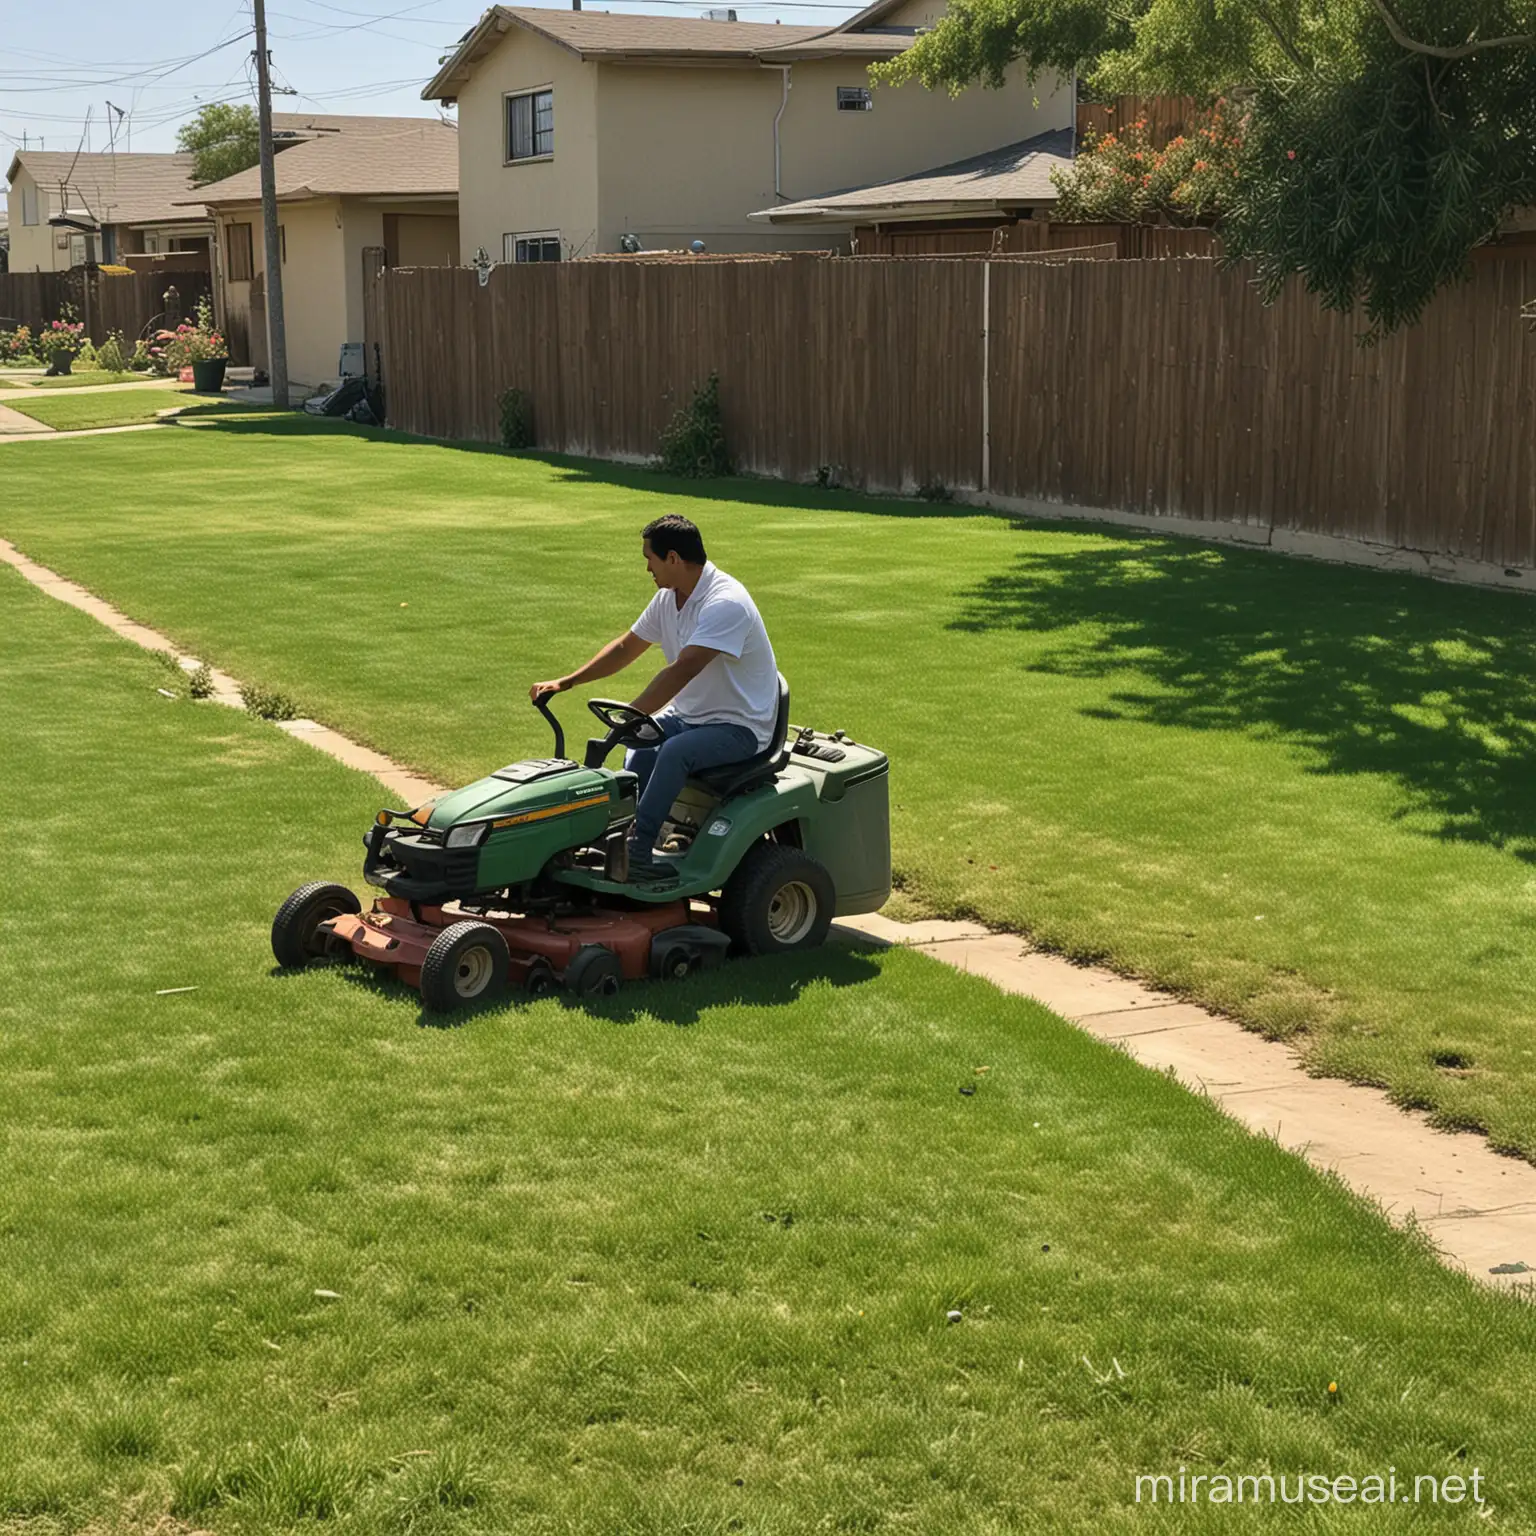 Community Bonding Mexicans Mowing the Neighborhood Lawn